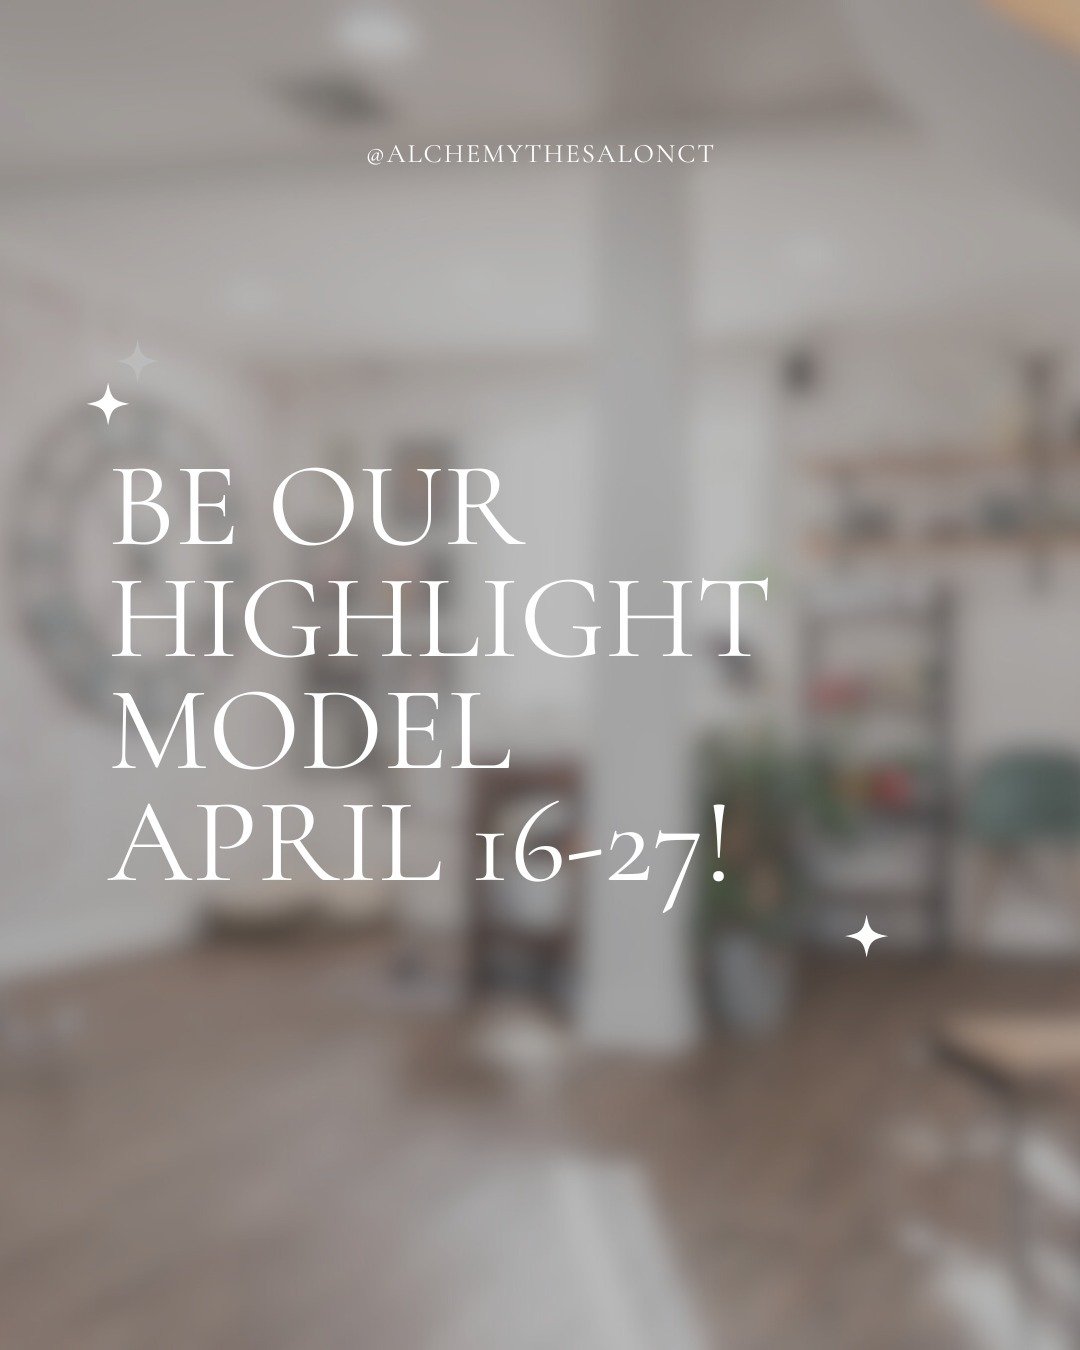 Be our next model, get your hair highlighted just in time for warmer weather! 😎

Our new stylist @tolo_totalbeauty is searching for highlight models from April 16-27th!

Models receive:
30-40% off the total cost of their service
All the amazing amen